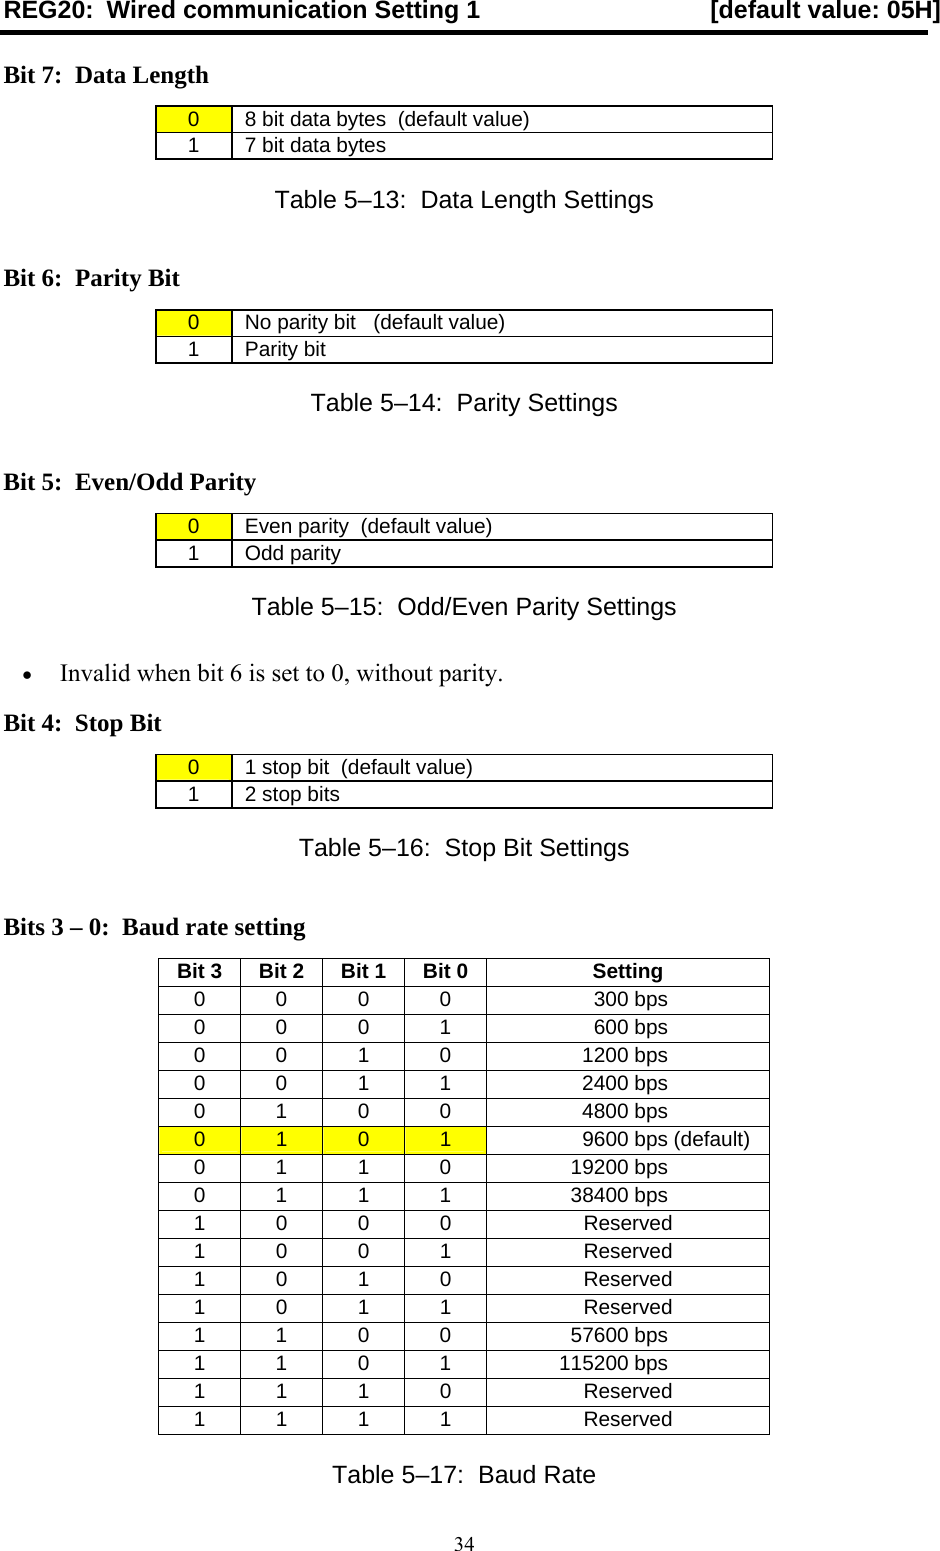  34REG20:  Wired communication Setting 1  [default value: 05H] Bit 7:  Data Length 0   8 bit data bytes  (default value) 1   7 bit data bytes Table 5–13:  Data Length Settings Bit 6:  Parity Bit 0   No parity bit   (default value) 1  Parity bit Table 5–14:  Parity Settings Bit 5:  Even/Odd Parity 0   Even parity  (default value) 1  Odd parity Table 5–15:  Odd/Even Parity Settings •  Invalid when bit 6 is set to 0, without parity. Bit 4:  Stop Bit 0   1 stop bit  (default value) 1   2 stop bits Table 5–16:  Stop Bit Settings Bits 3 – 0:  Baud rate setting Bit 3 Bit 2  Bit 1 Bit 0 Setting 0  0  0  0                    300 bps 0  0  0  1                    600 bps 0  0  1  0                  1200 bps 0  0  1  1                  2400 bps 0  1  0  0                  4800 bps 0  1  0  1                  9600 bps (default) 0  1  1  0                19200 bps 0  1  1  1                38400 bps 1 0 0 0  Reserved 1 0 0 1  Reserved 1 0 1 0  Reserved 1 0 1 1  Reserved 1  1  0  0                57600 bps 1  1  0  1              115200 bps 1 1 1 0  Reserved 1 1 1 1  Reserved Table 5–17:  Baud Rate 